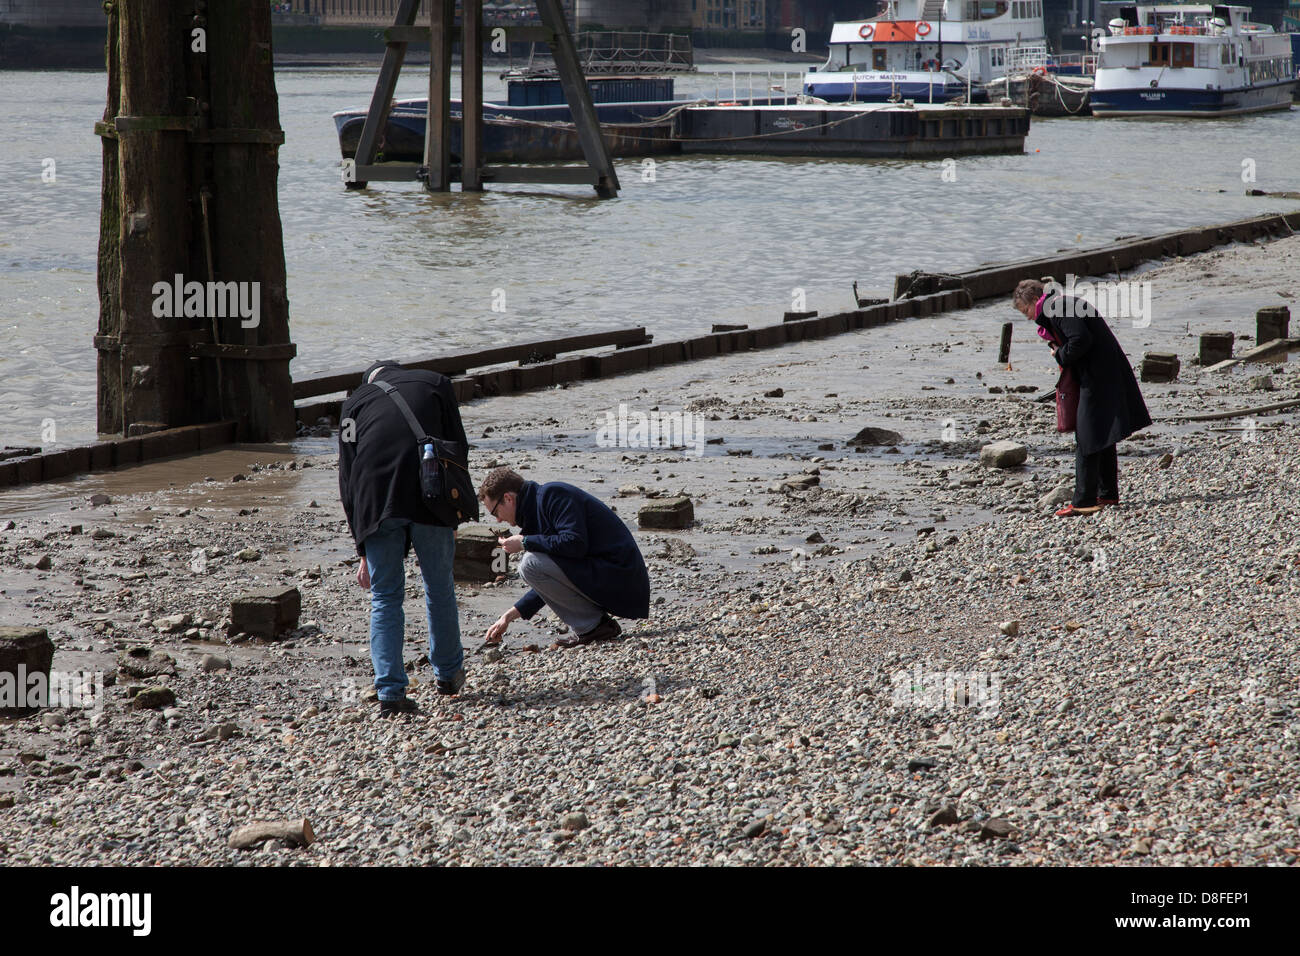 People mudlarking on foreshore at low tide, River Thames, London Stock Photo